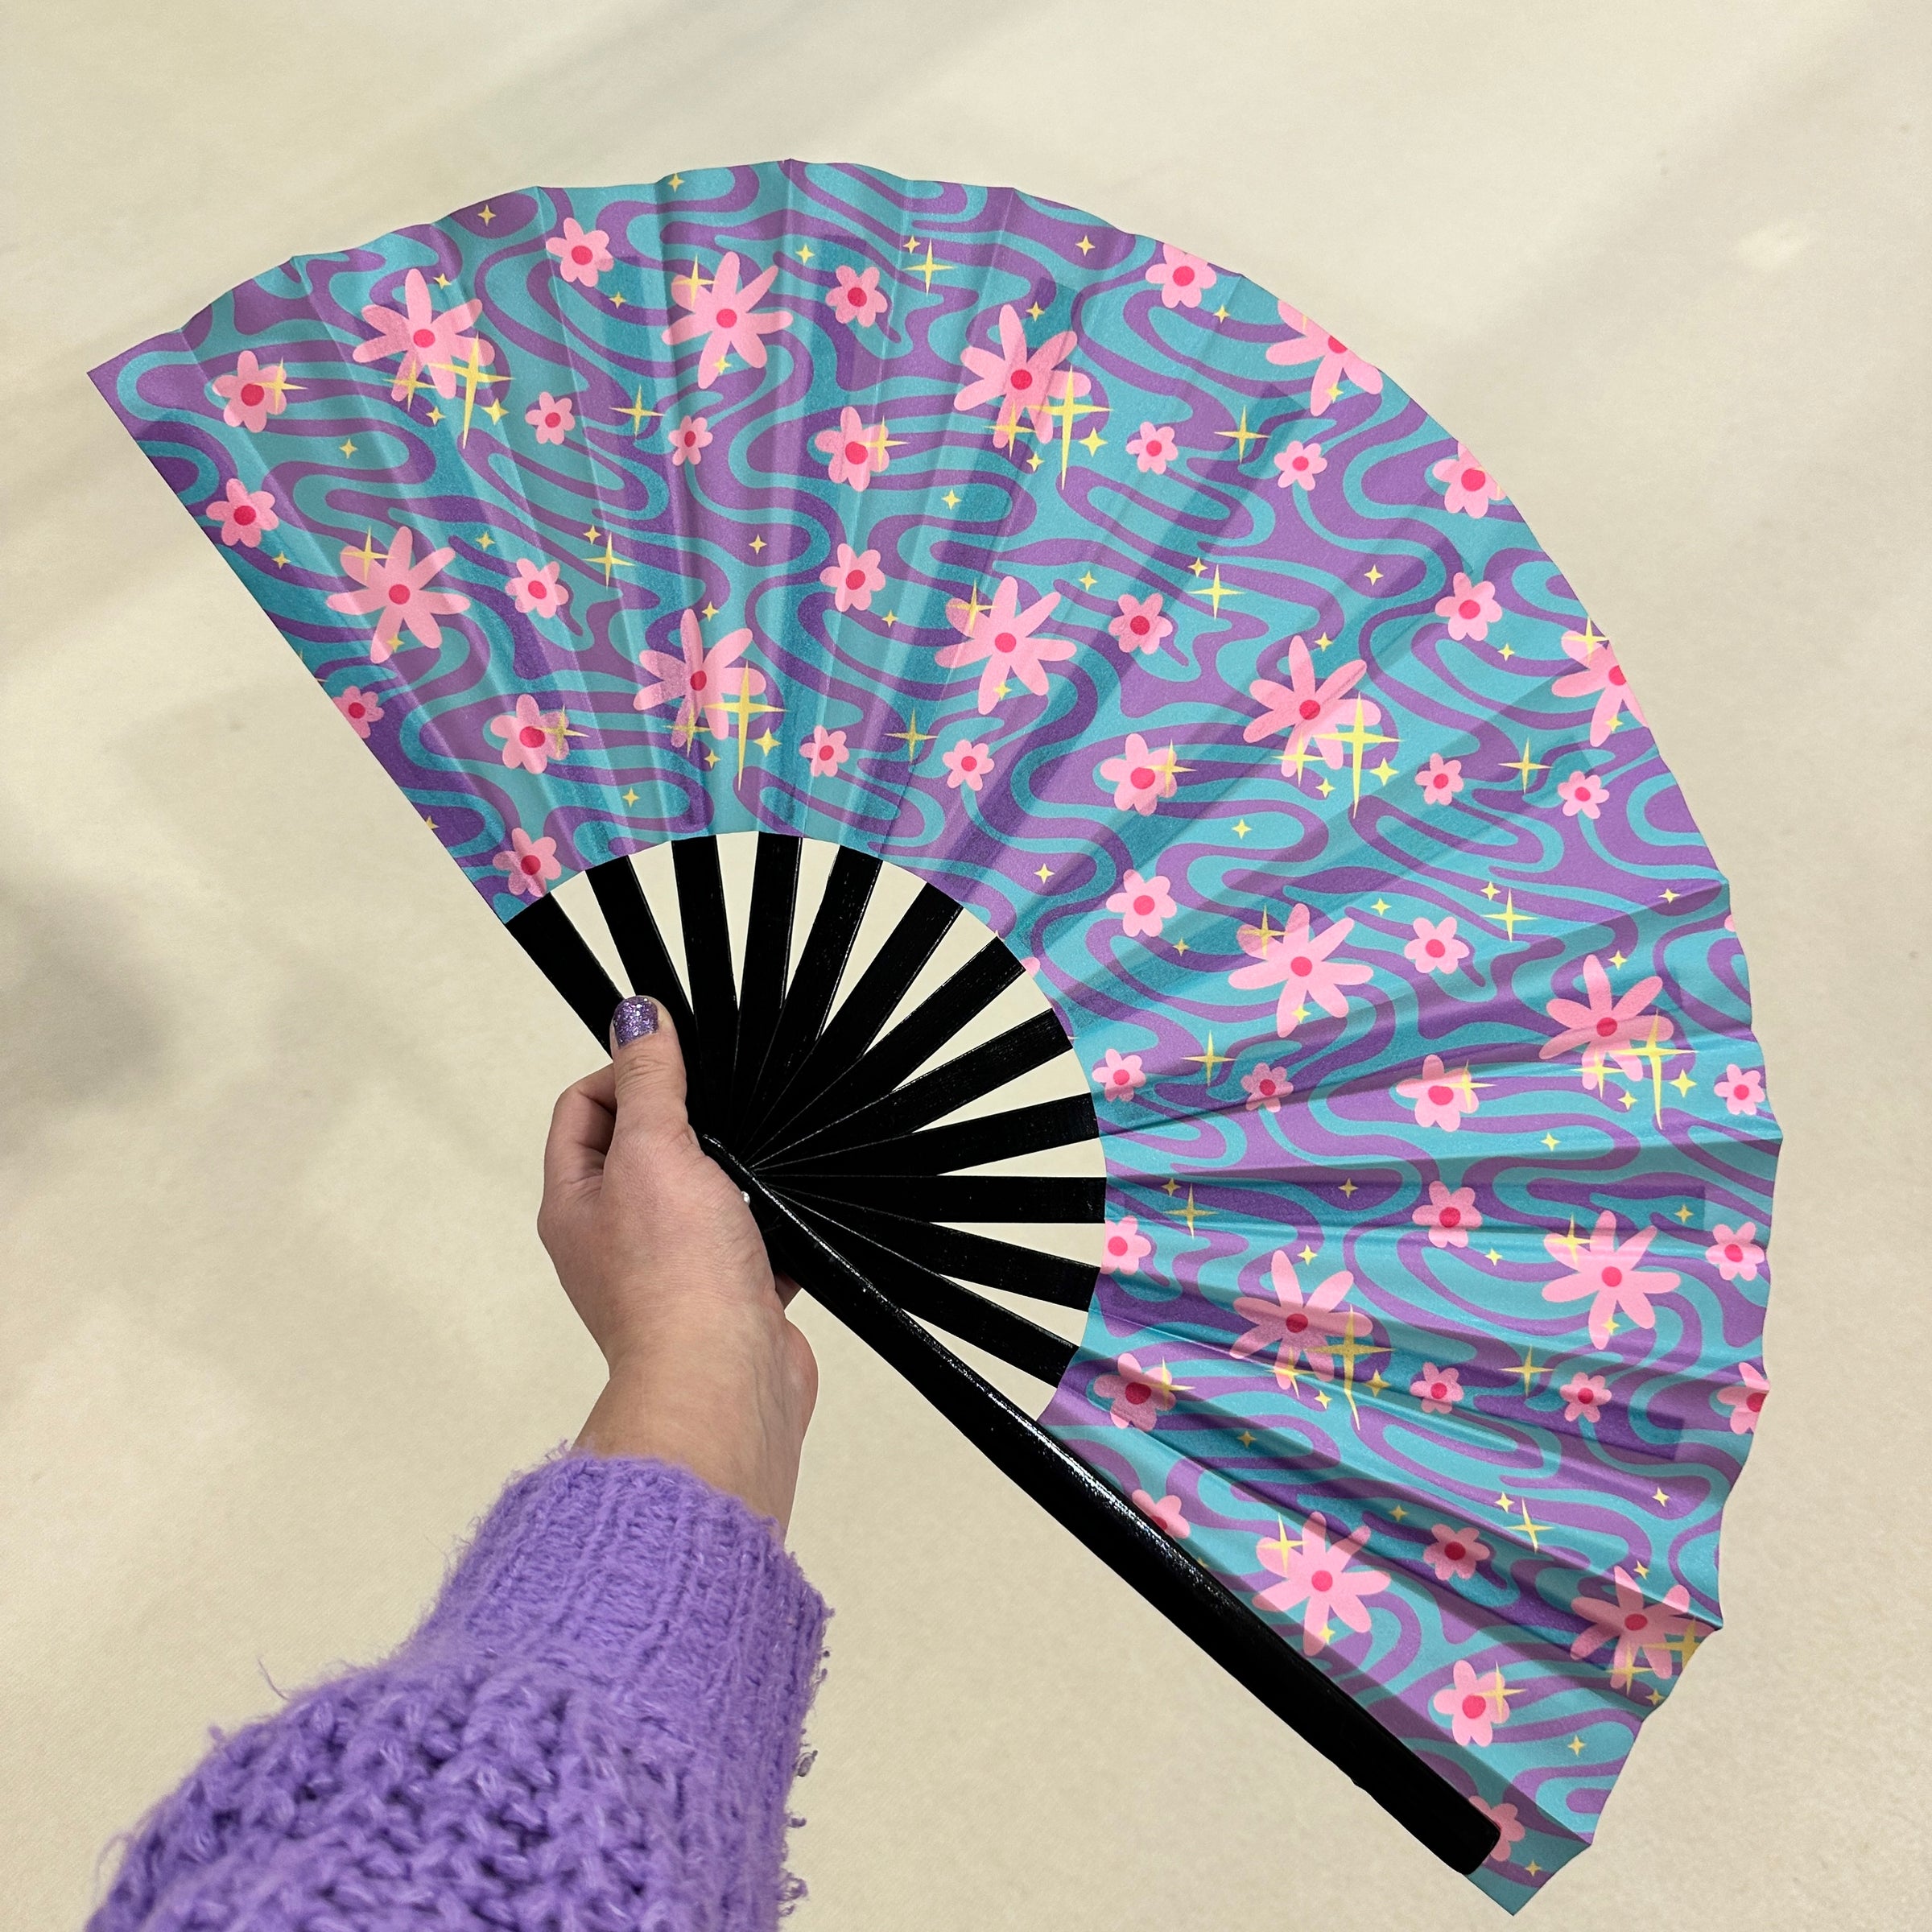 Giant Clacking Hand Fan with Floral Swirls Print in Purple, Teal & Pink (Glows in UV!)